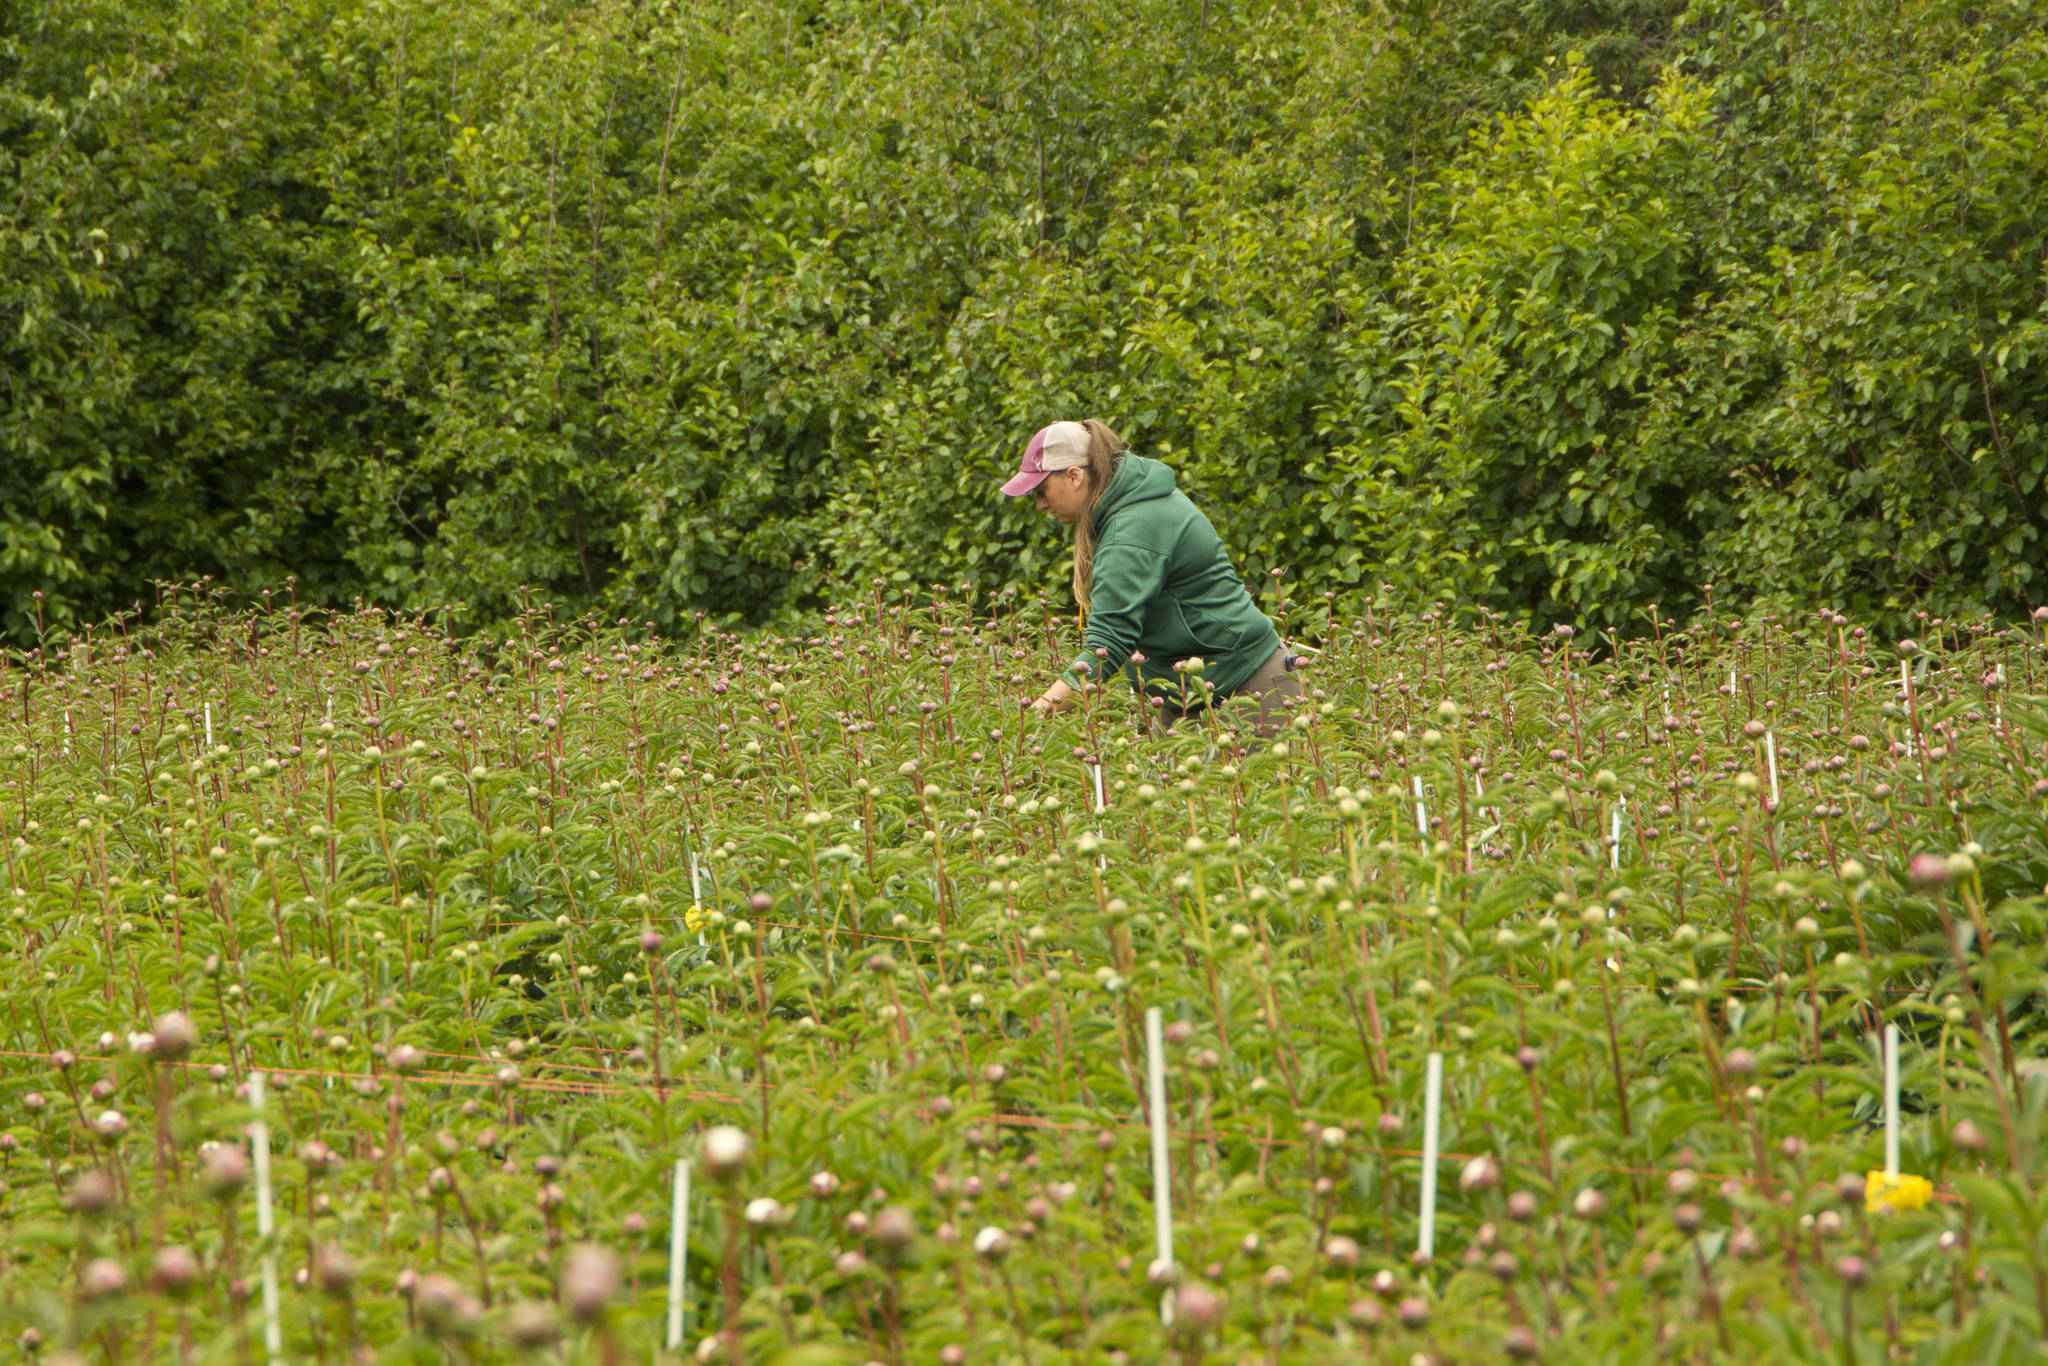 An employee of Alaska Perfect Peony Farm tends to the budding peonies. Because of the cold temperatures this summer, the peonies are late to bloom. Photo by Sarah Knapp/Homer News